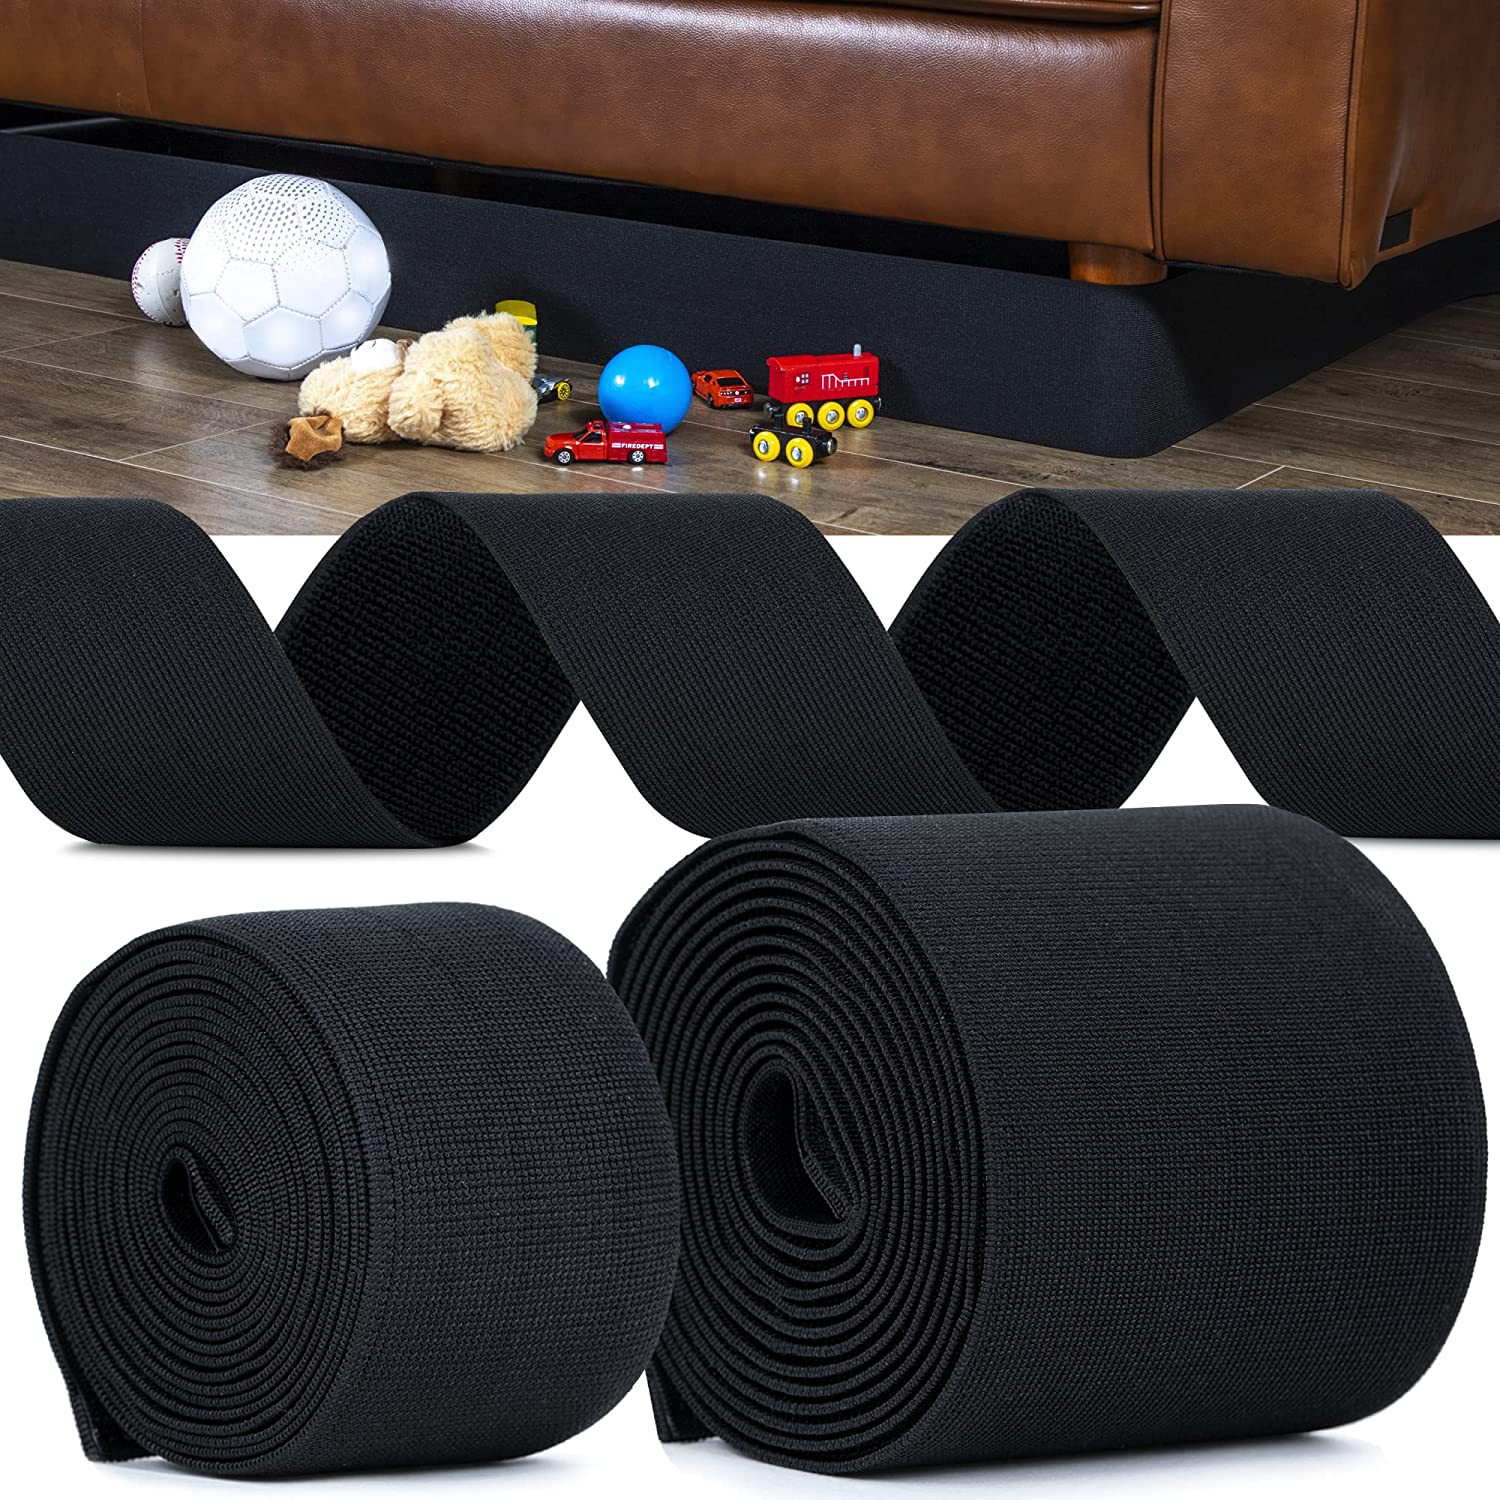 Under Couch Blocker Guards Stop Toys And Objects From Rolling Under  Furniture With Pvc Material